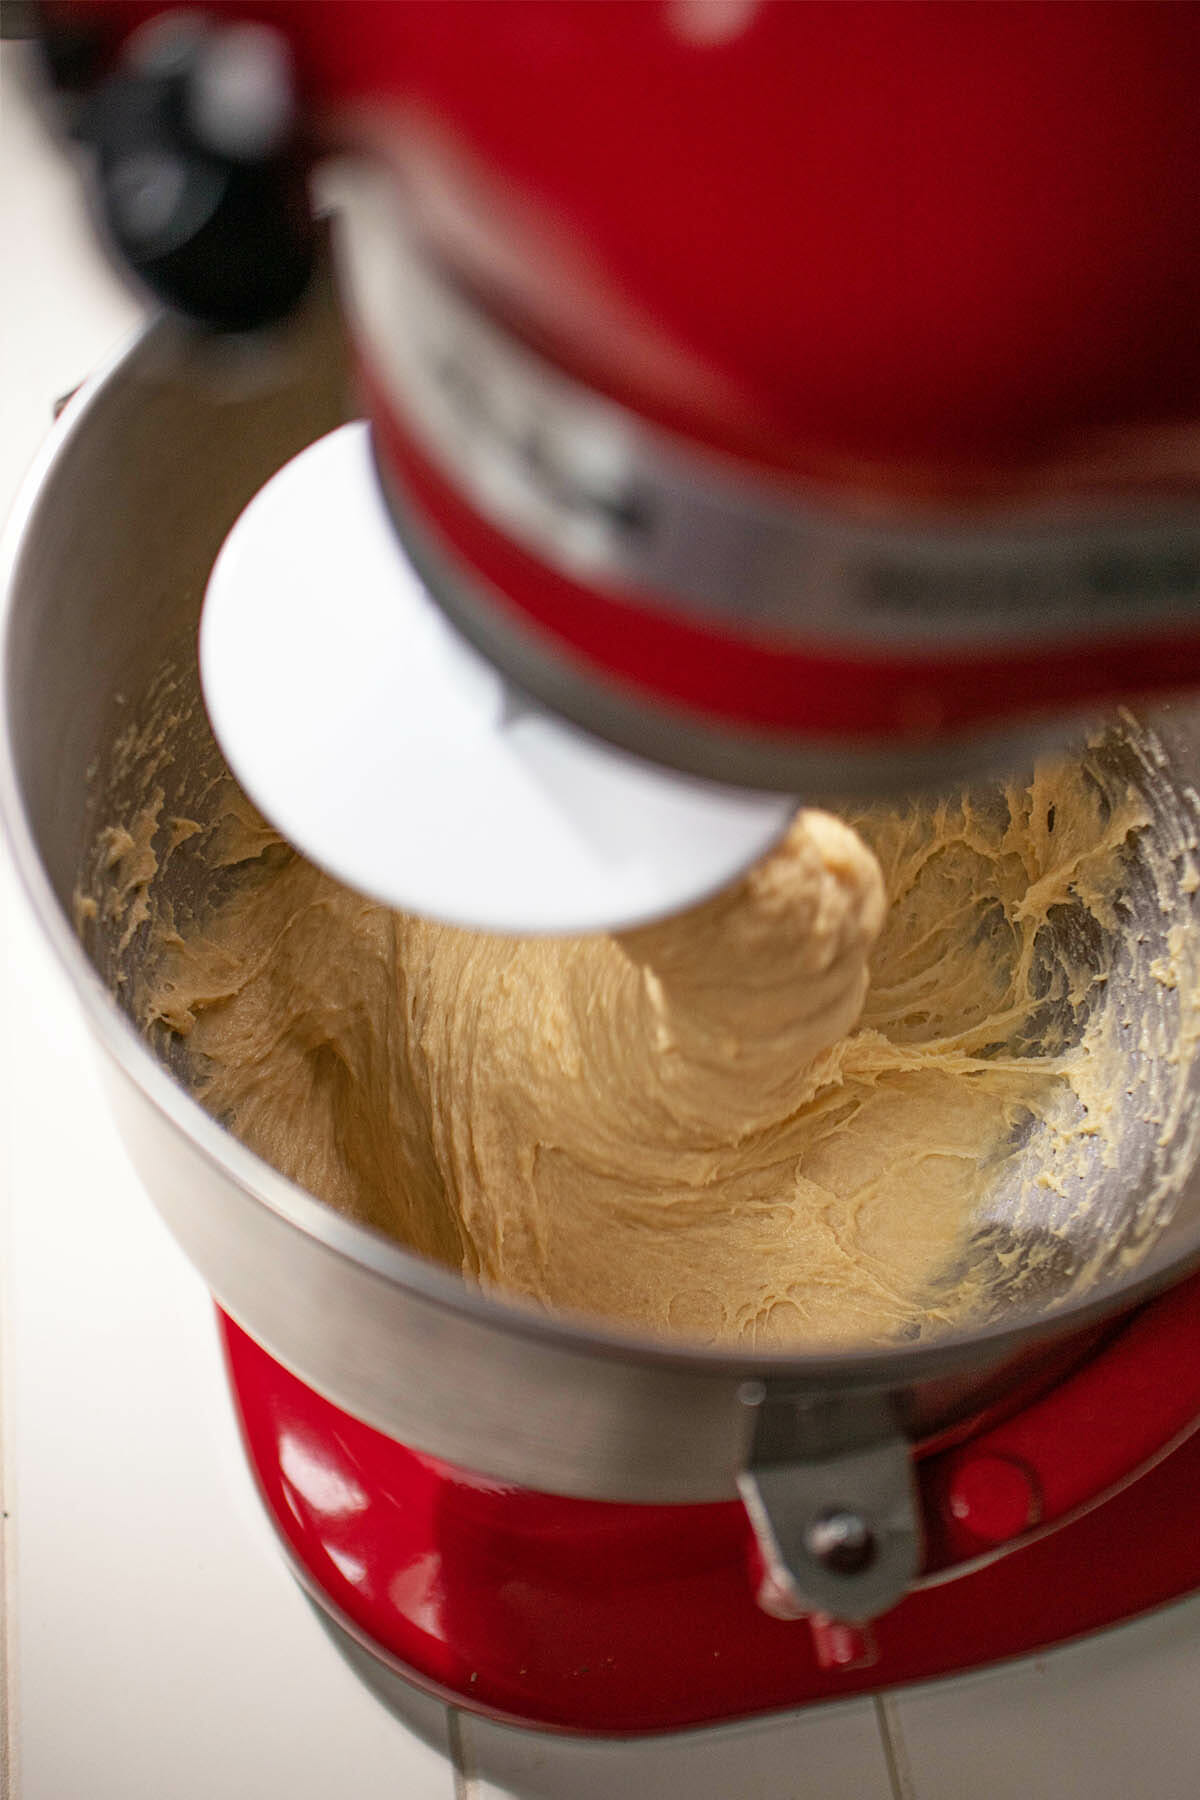 kneading sweet bread in a stand mixer